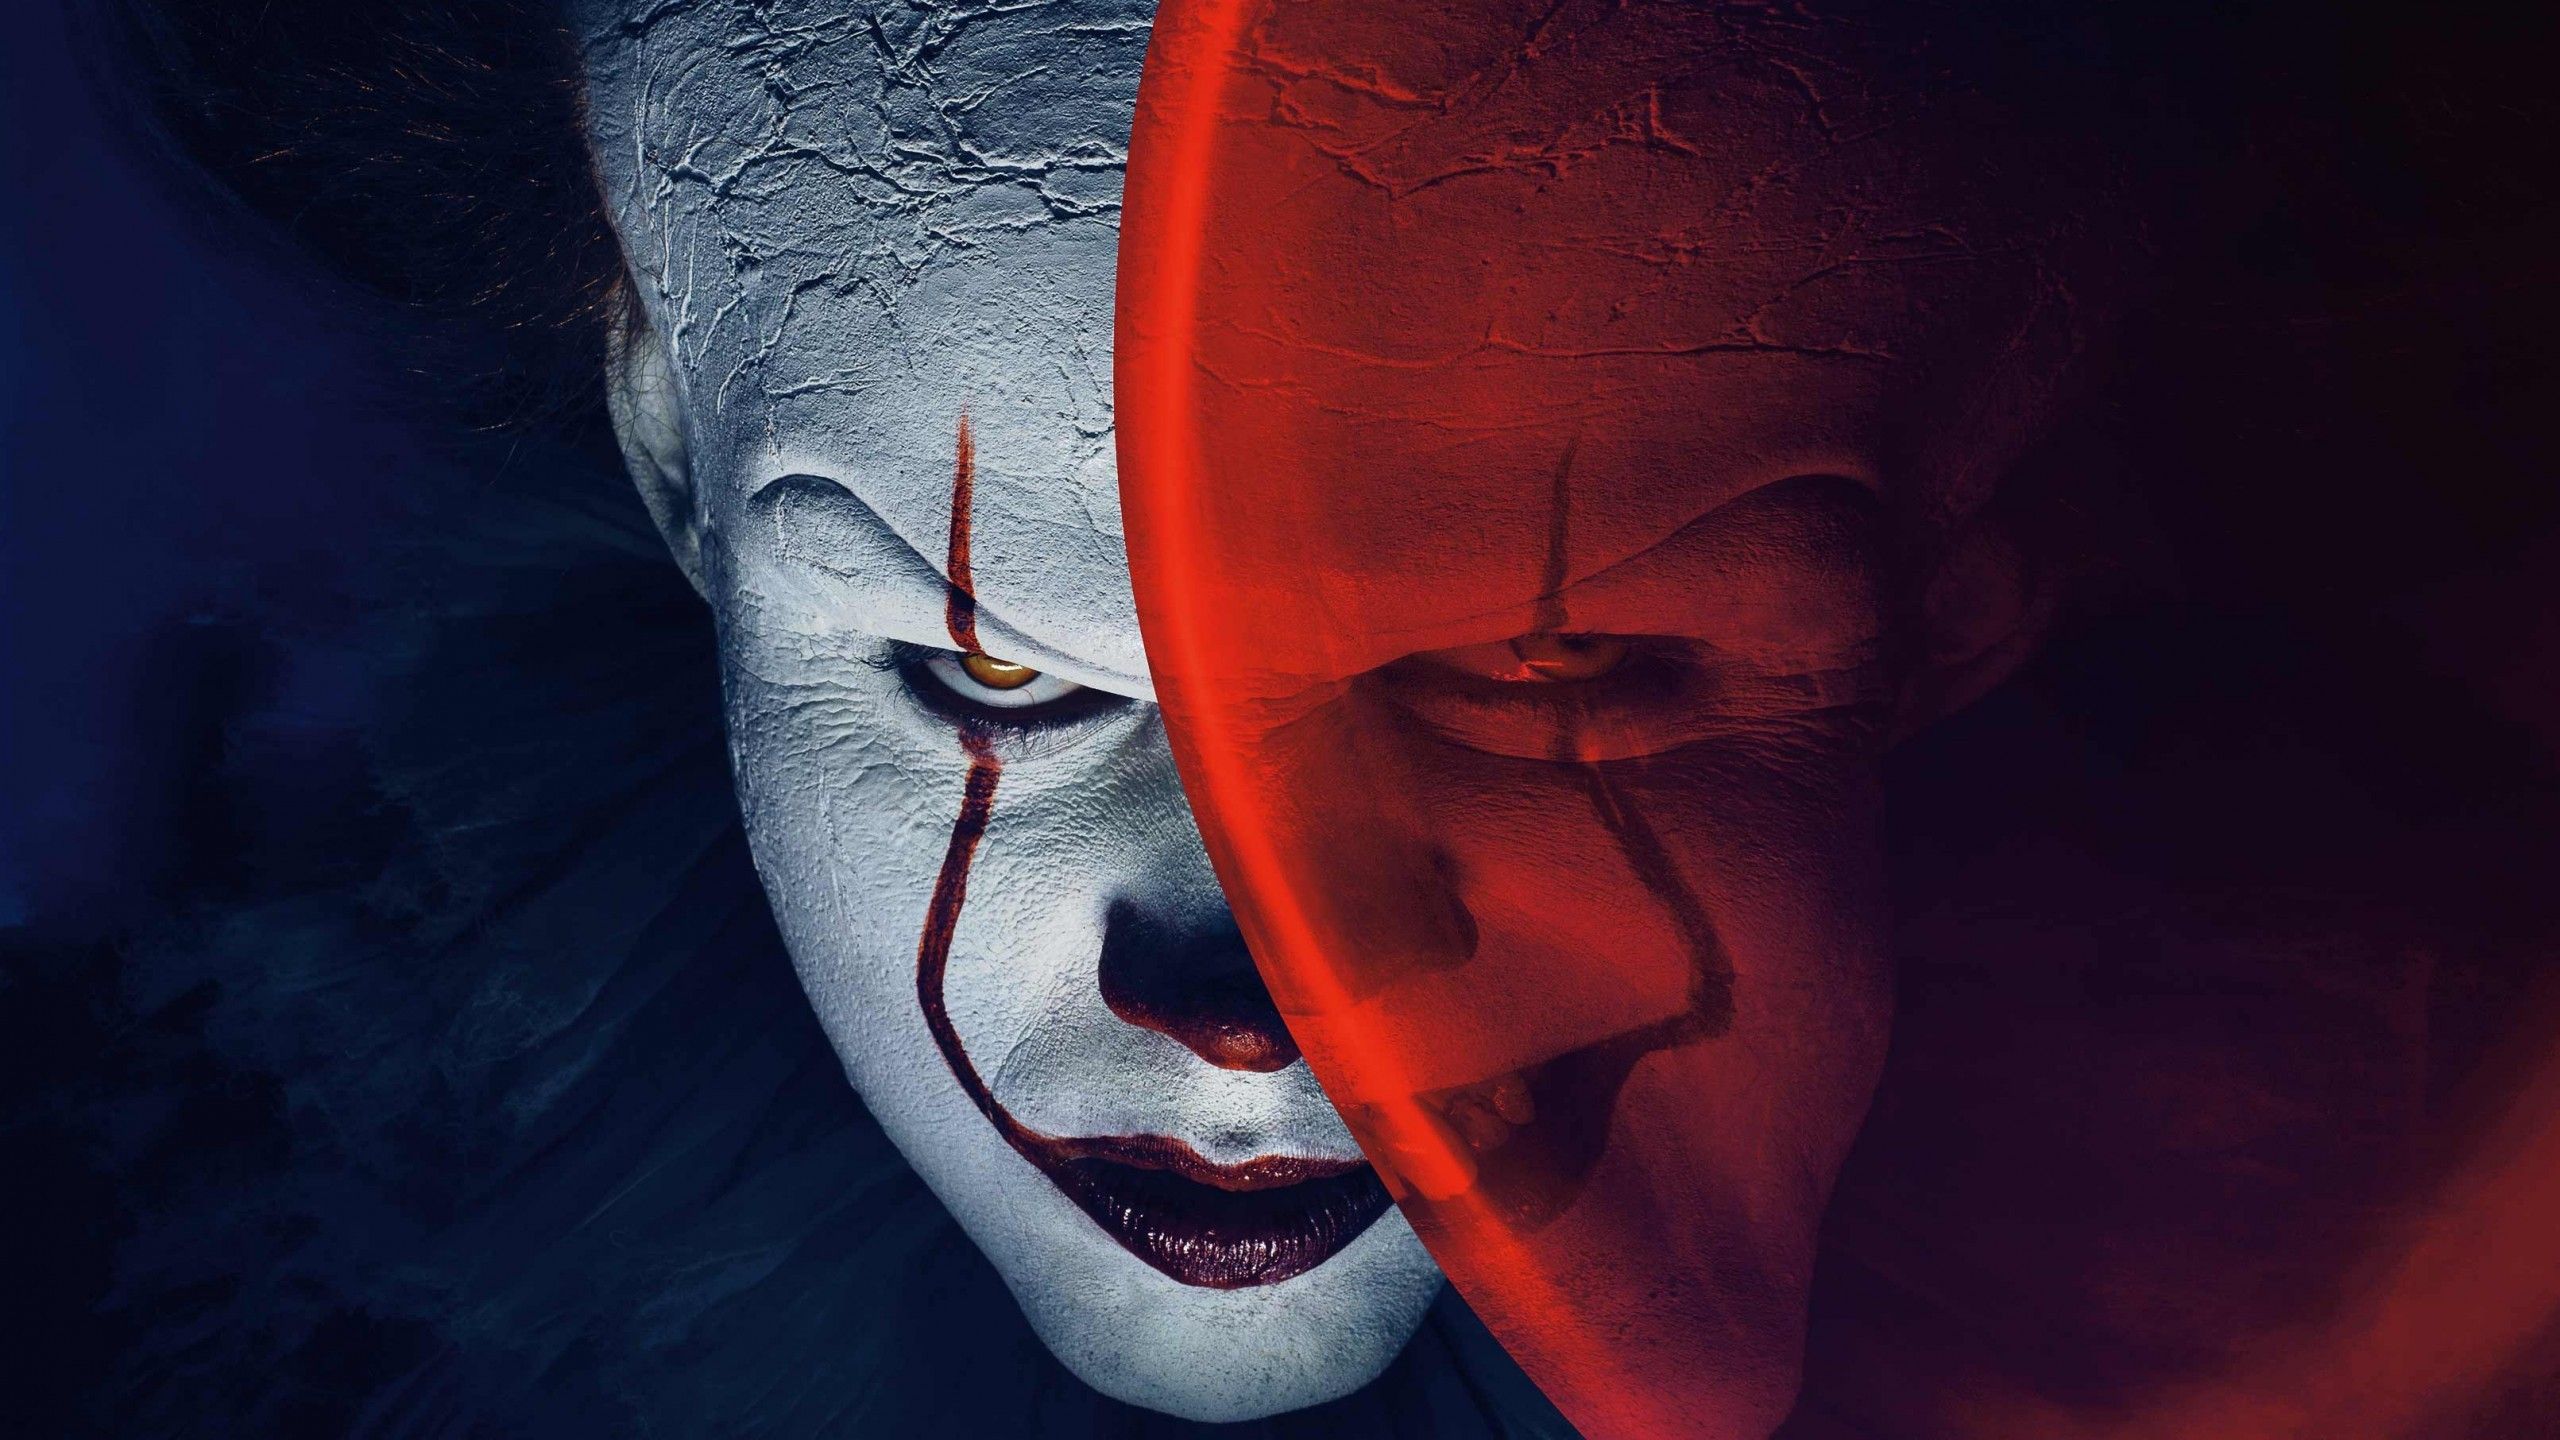 Download 2560x1440 Horror Movies, It 2017 Wallpaper for iMac 27 inch